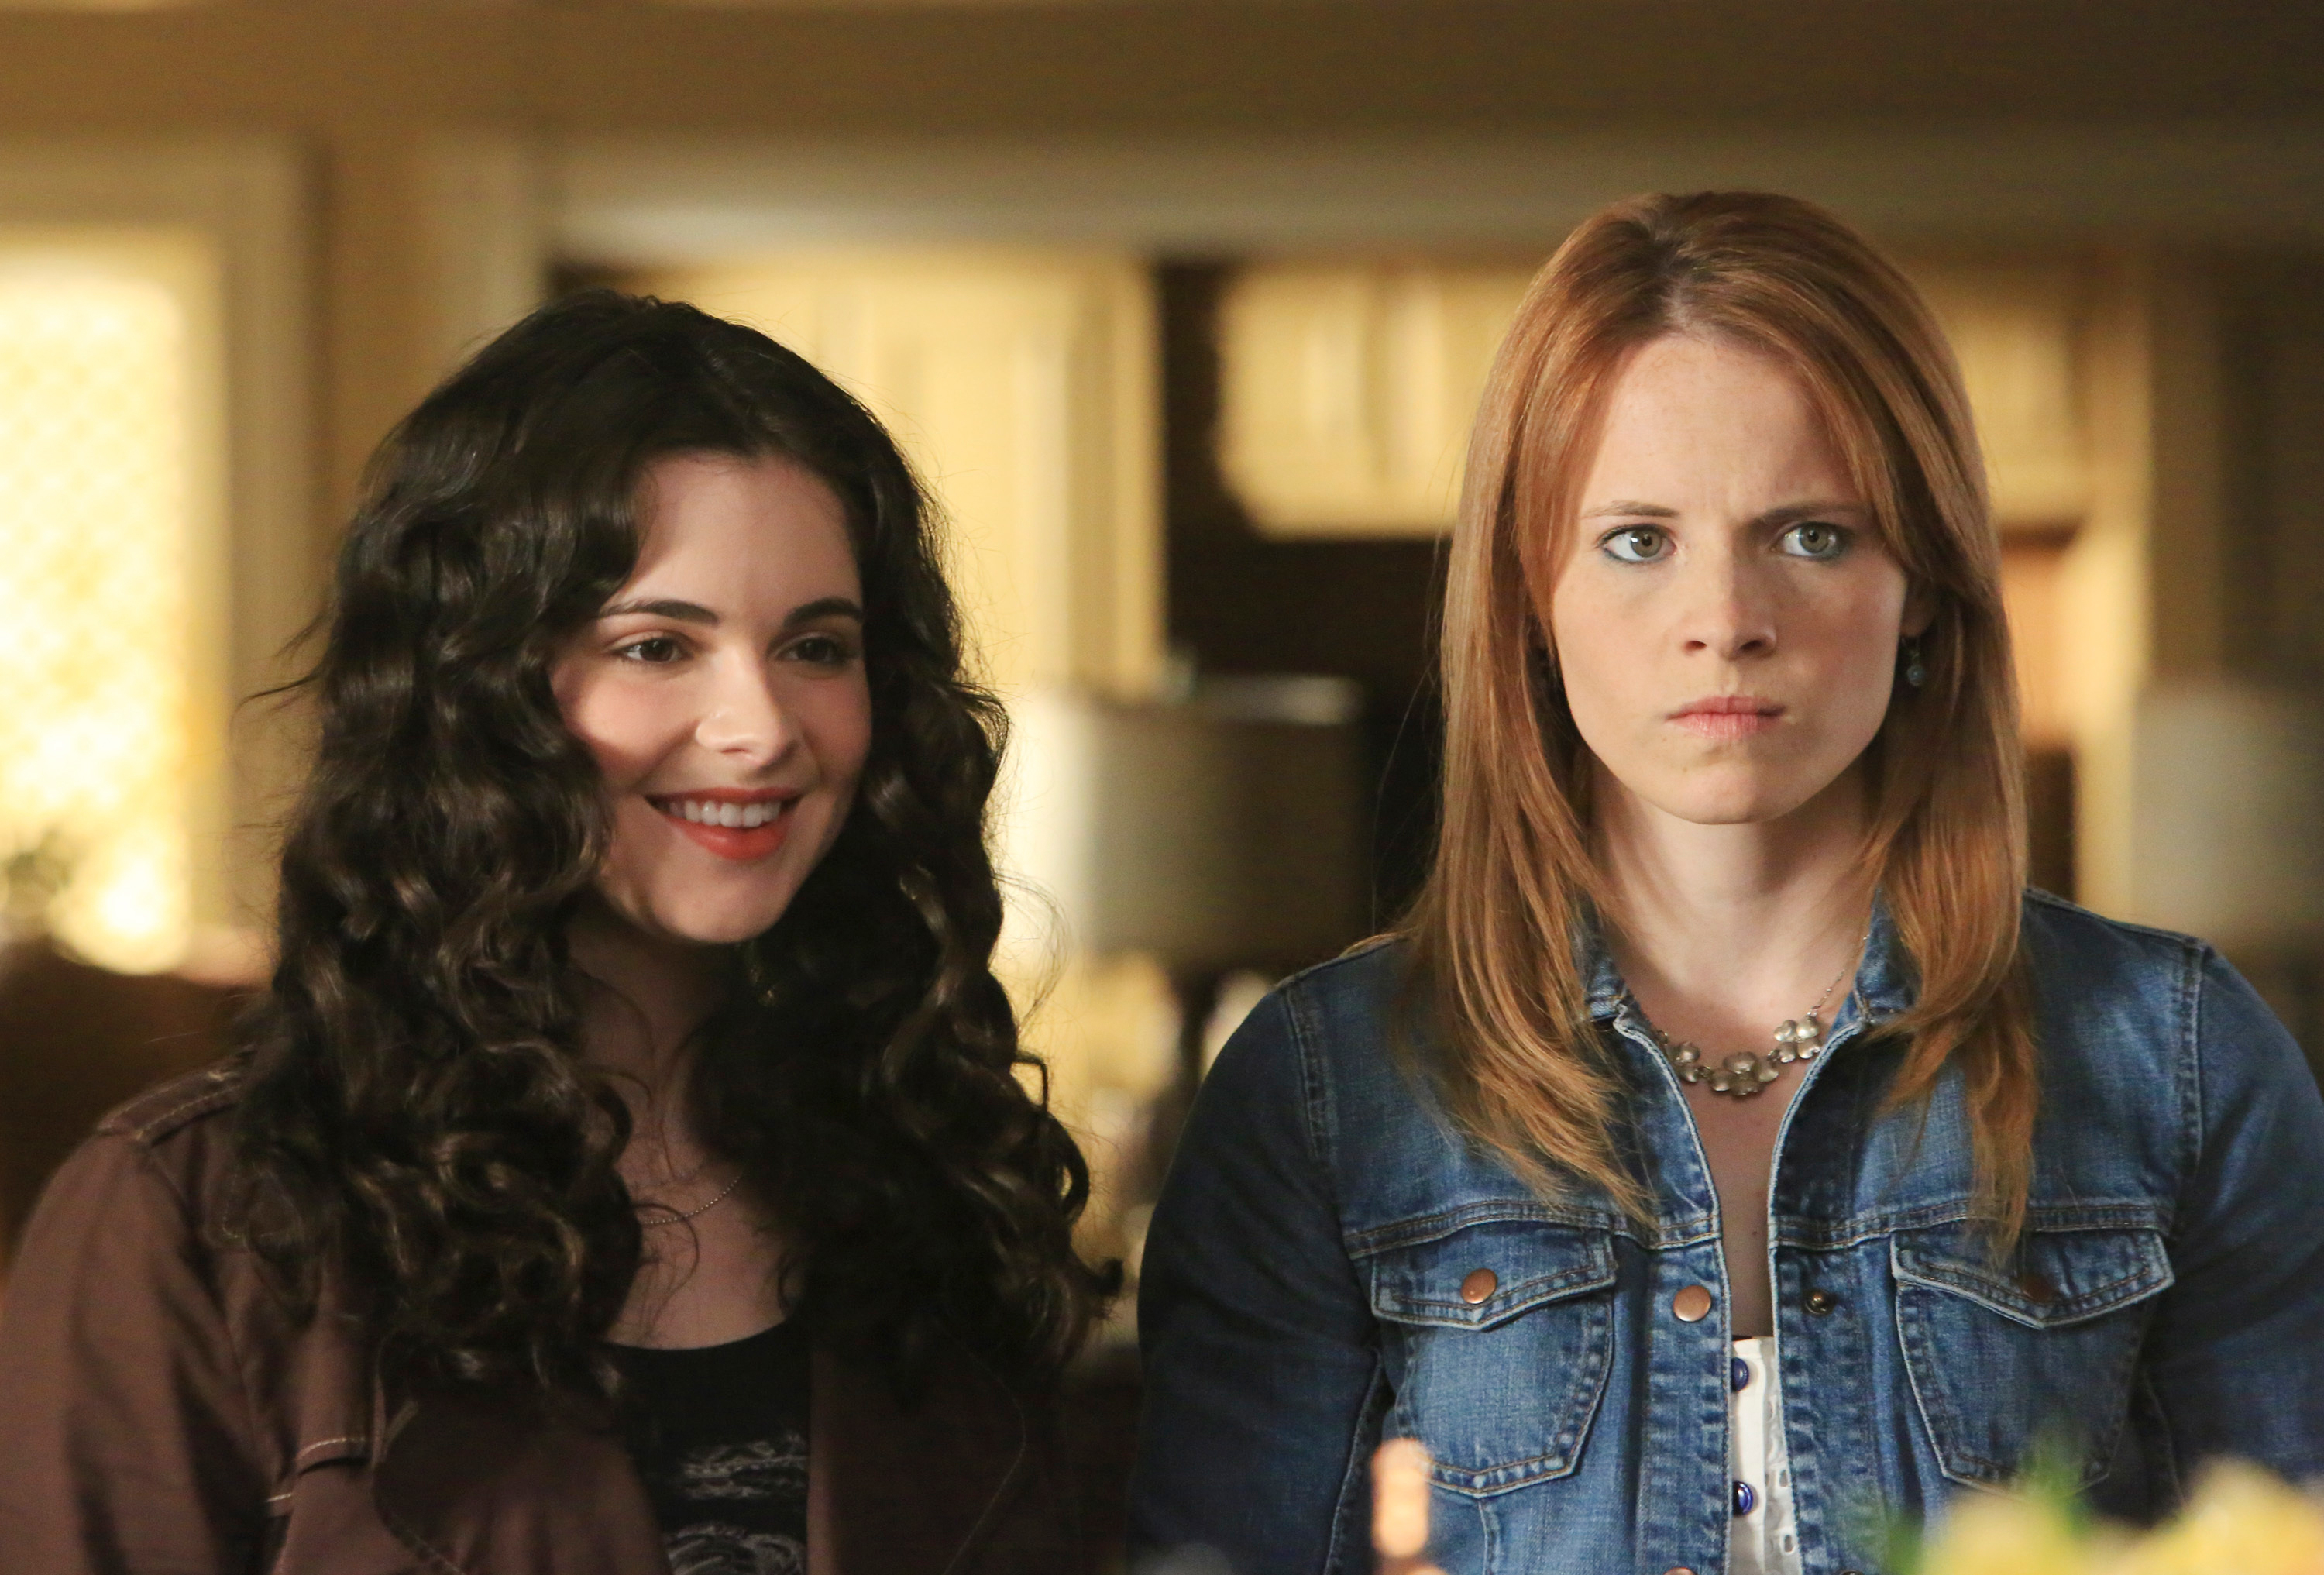 Vanessa Marano and Katie Leclerc stand side by side; Vanessa smiles, wearing curly hair, Katie appears serious in a denim jacket with straight hair